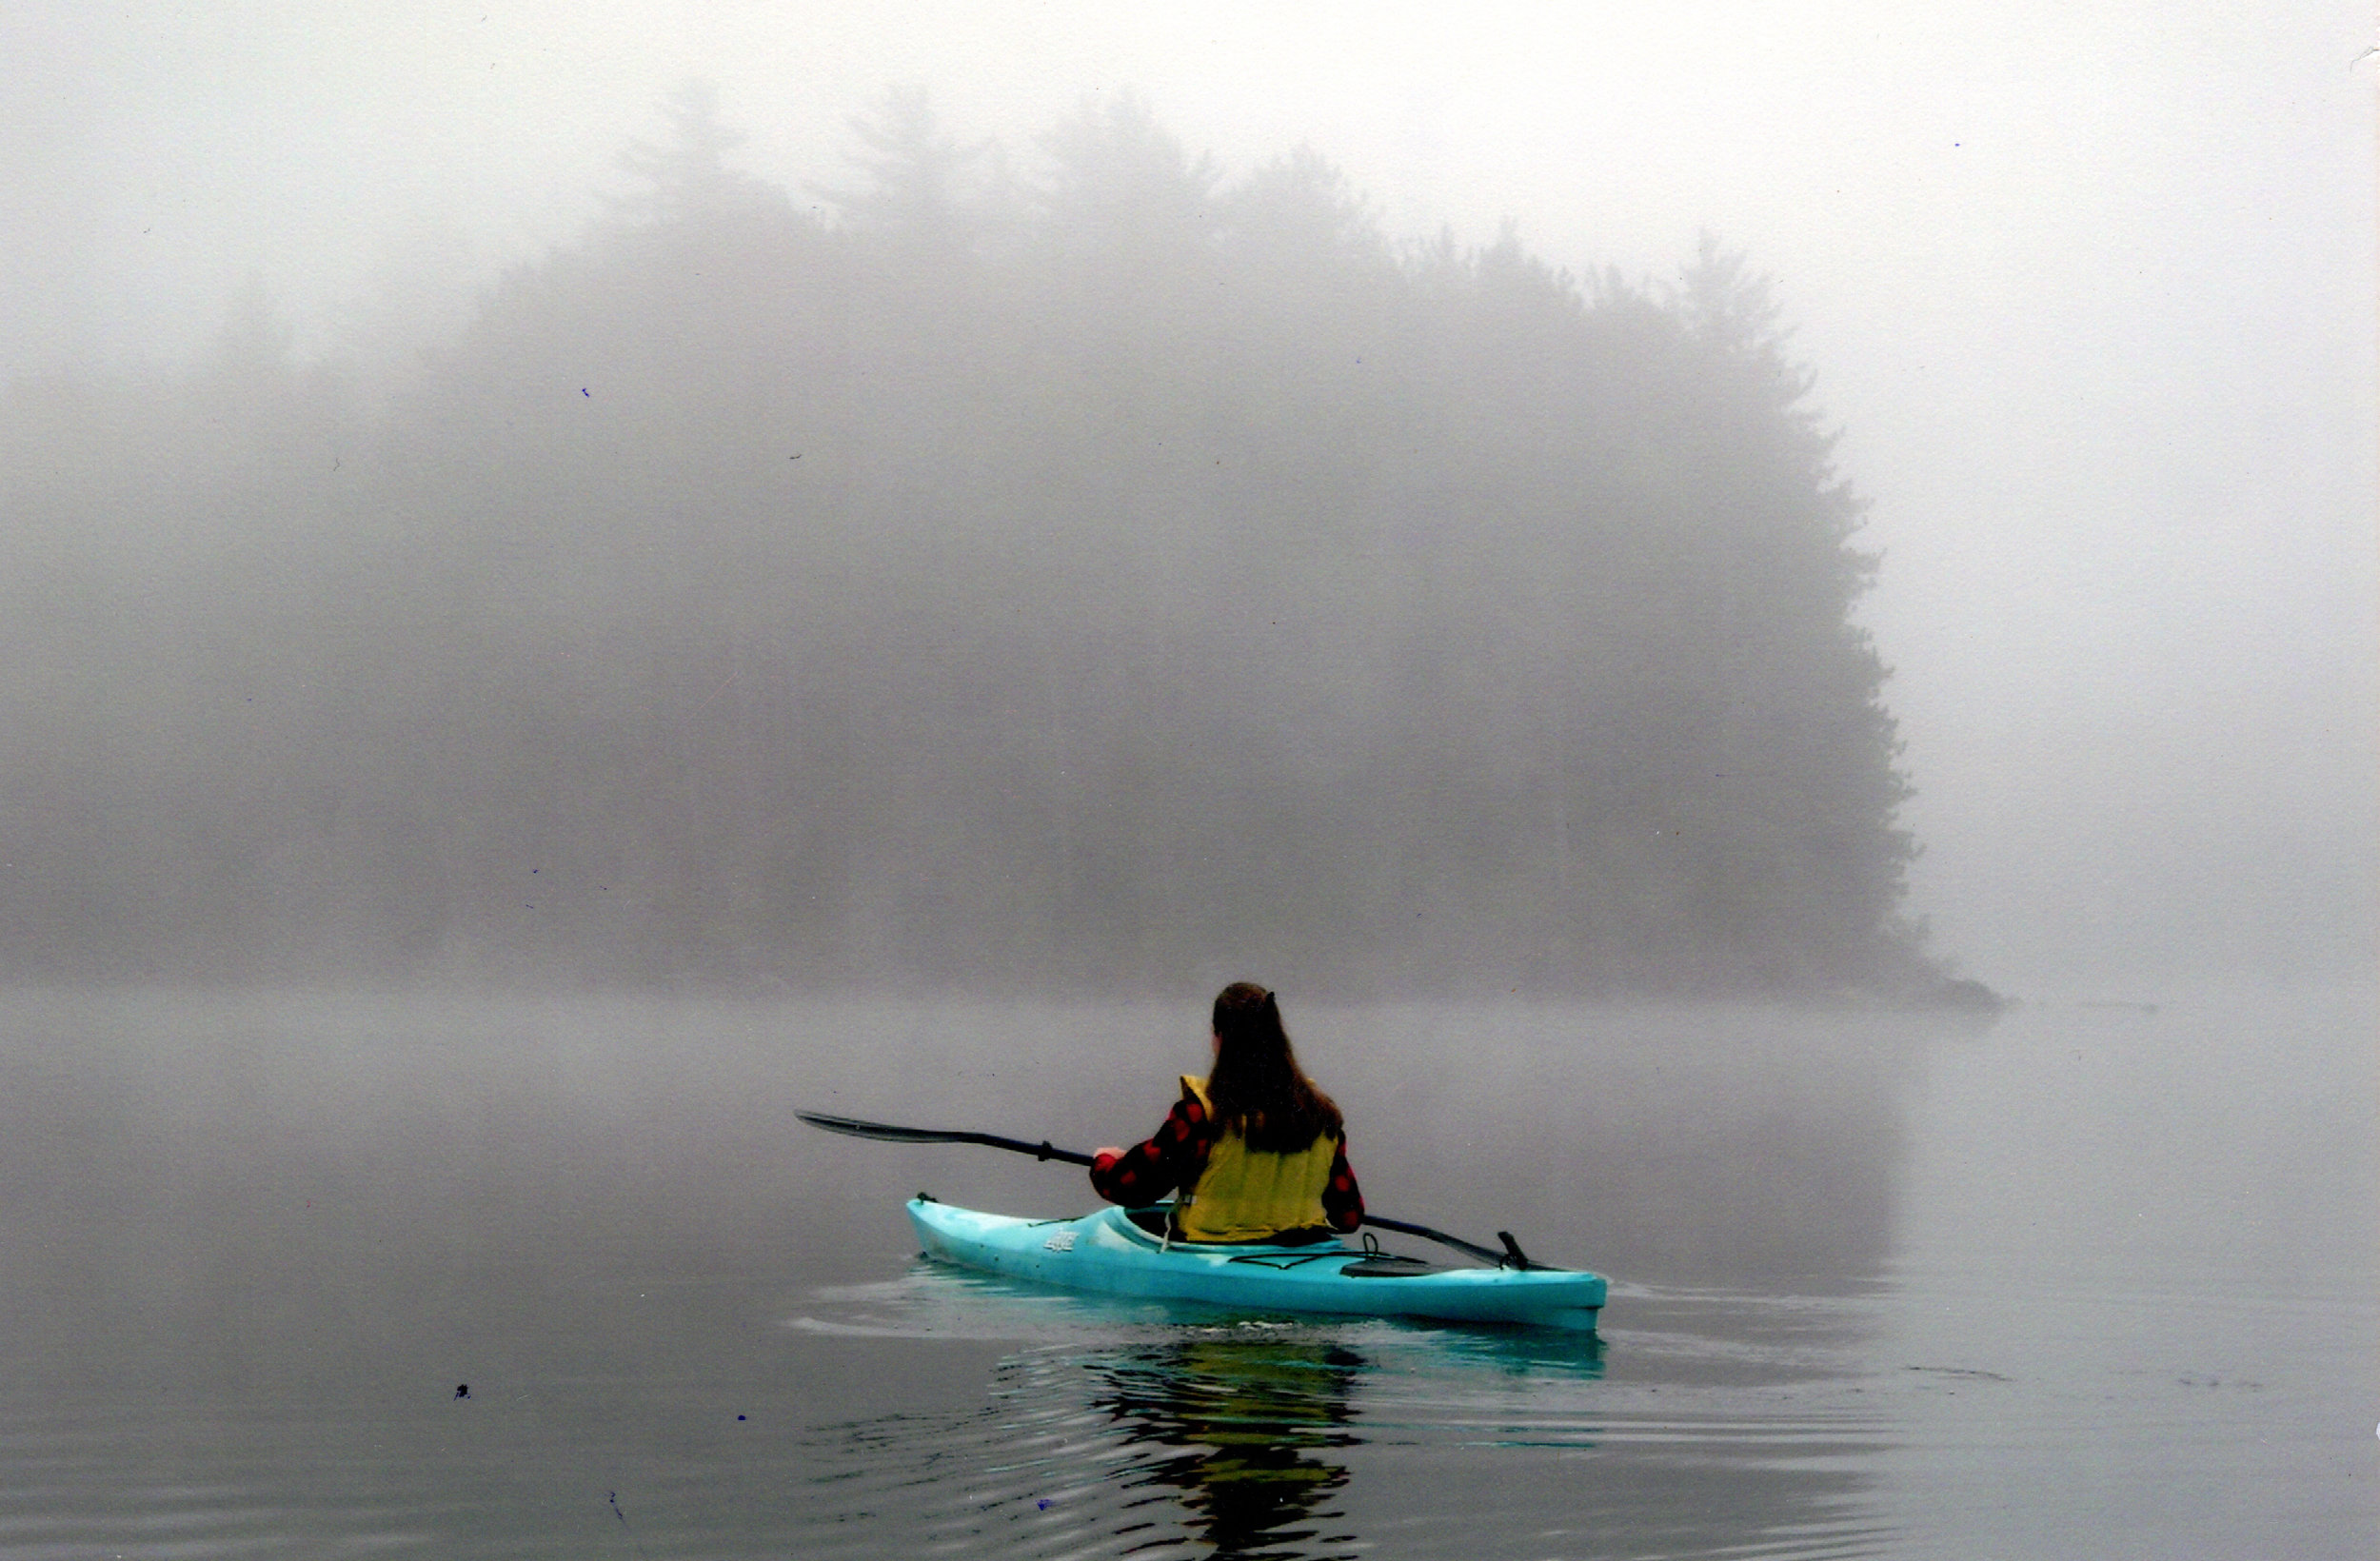 #29: “Paddling in Mist, Age 17”